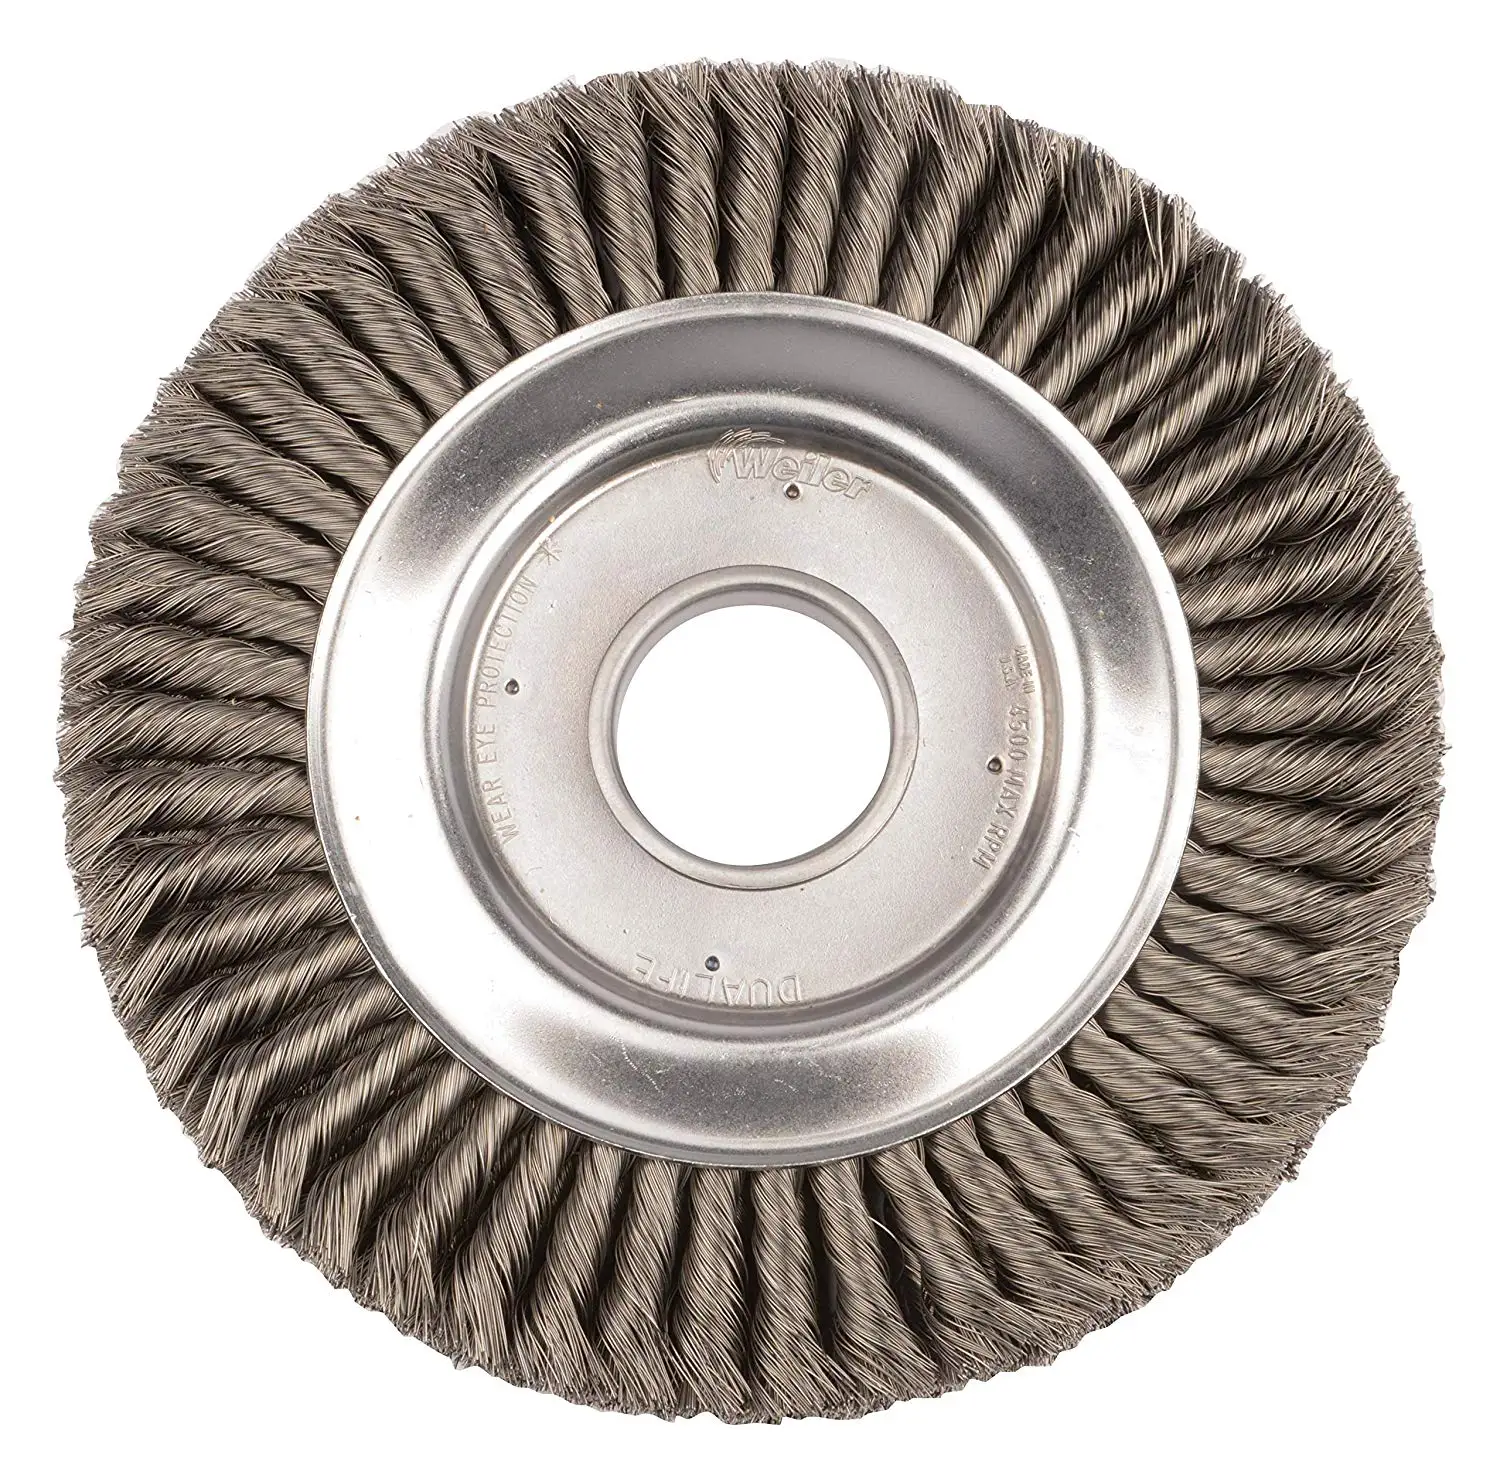 10 Inch Multilayer Row Twisted Wire Wheel Brush, Full Twist Knotted Wire Brush Wheel with Round Hole